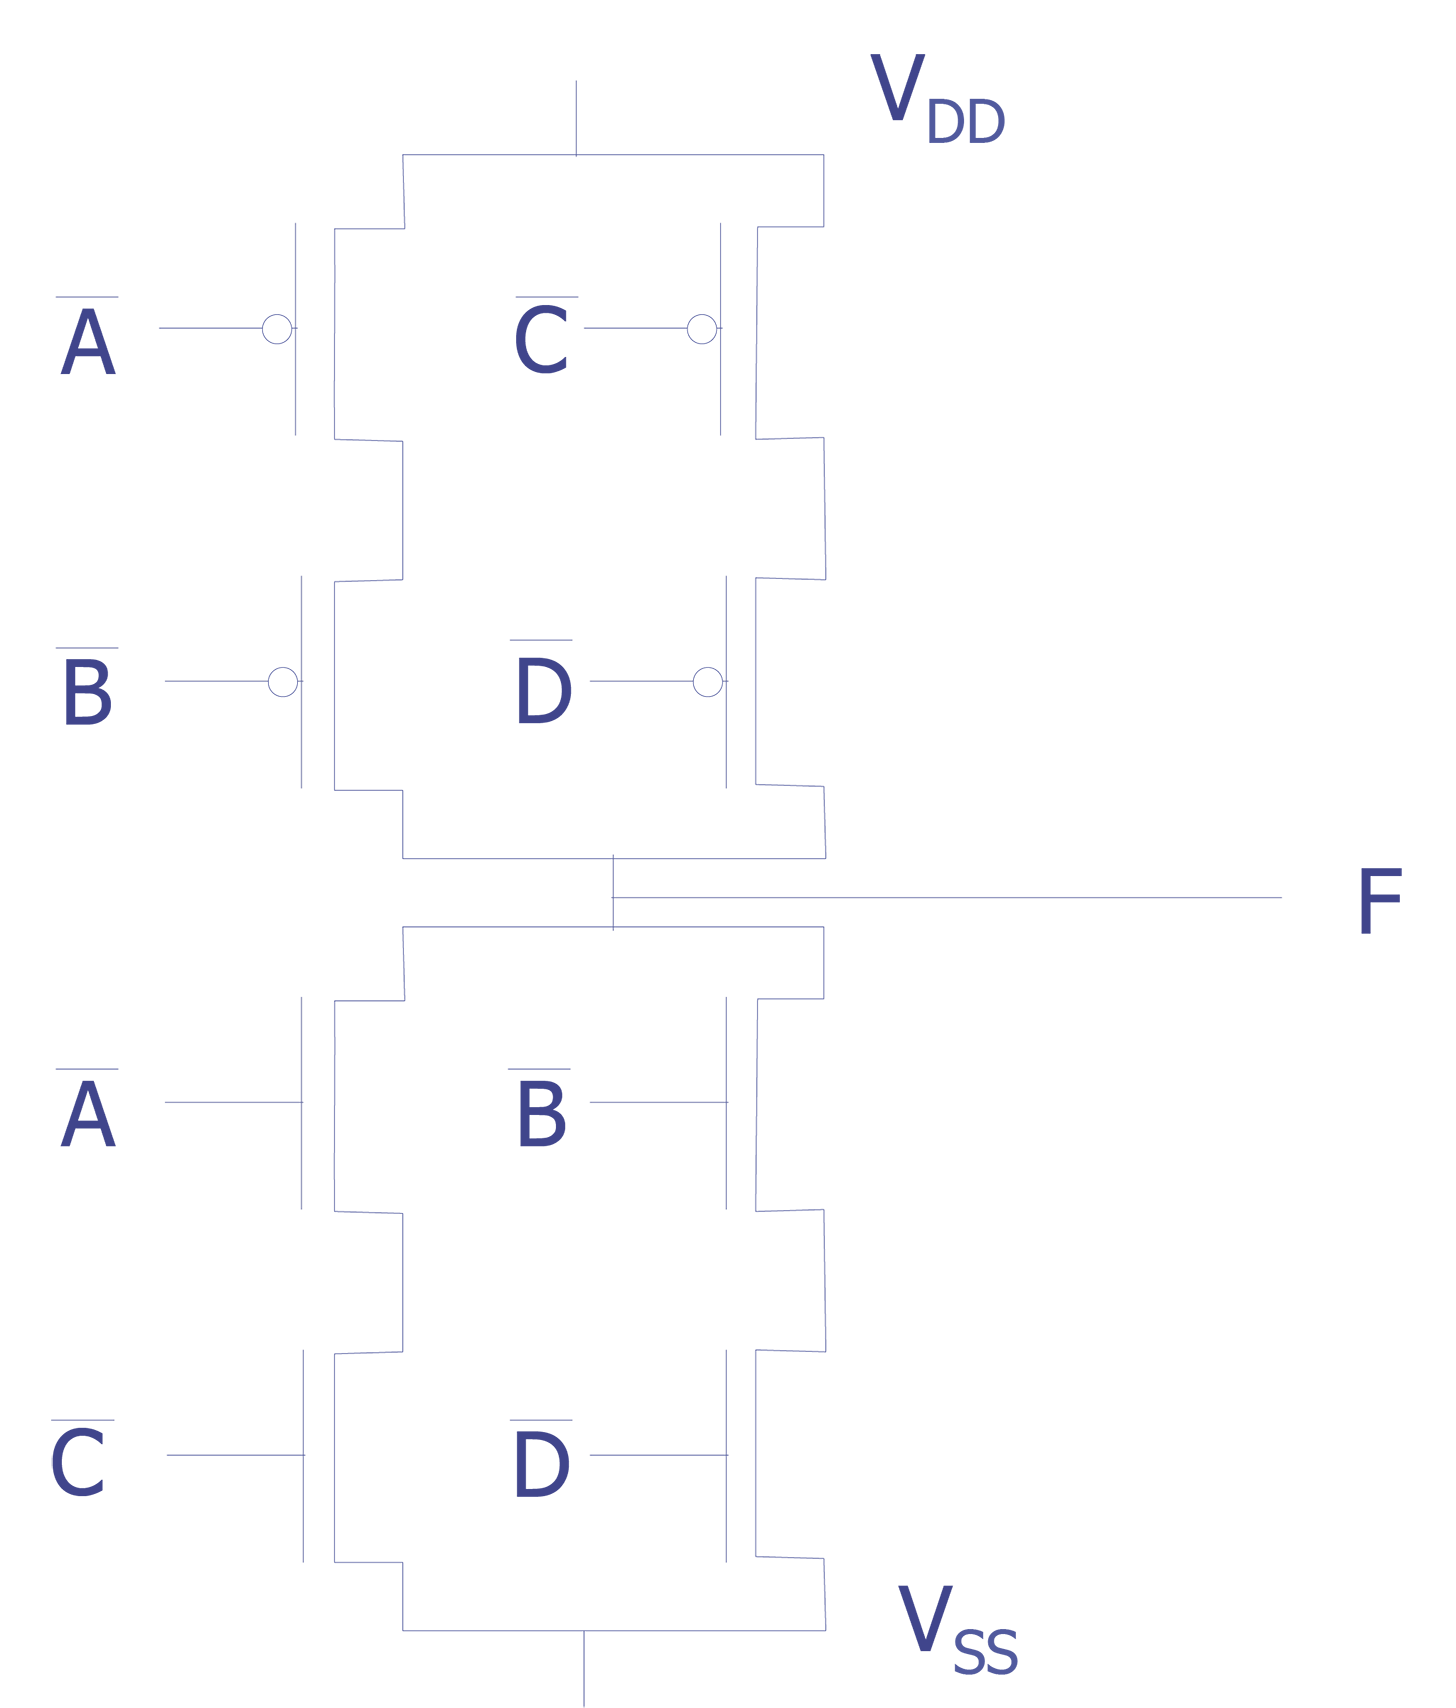 CMOS circuit function showing the concept of duality.